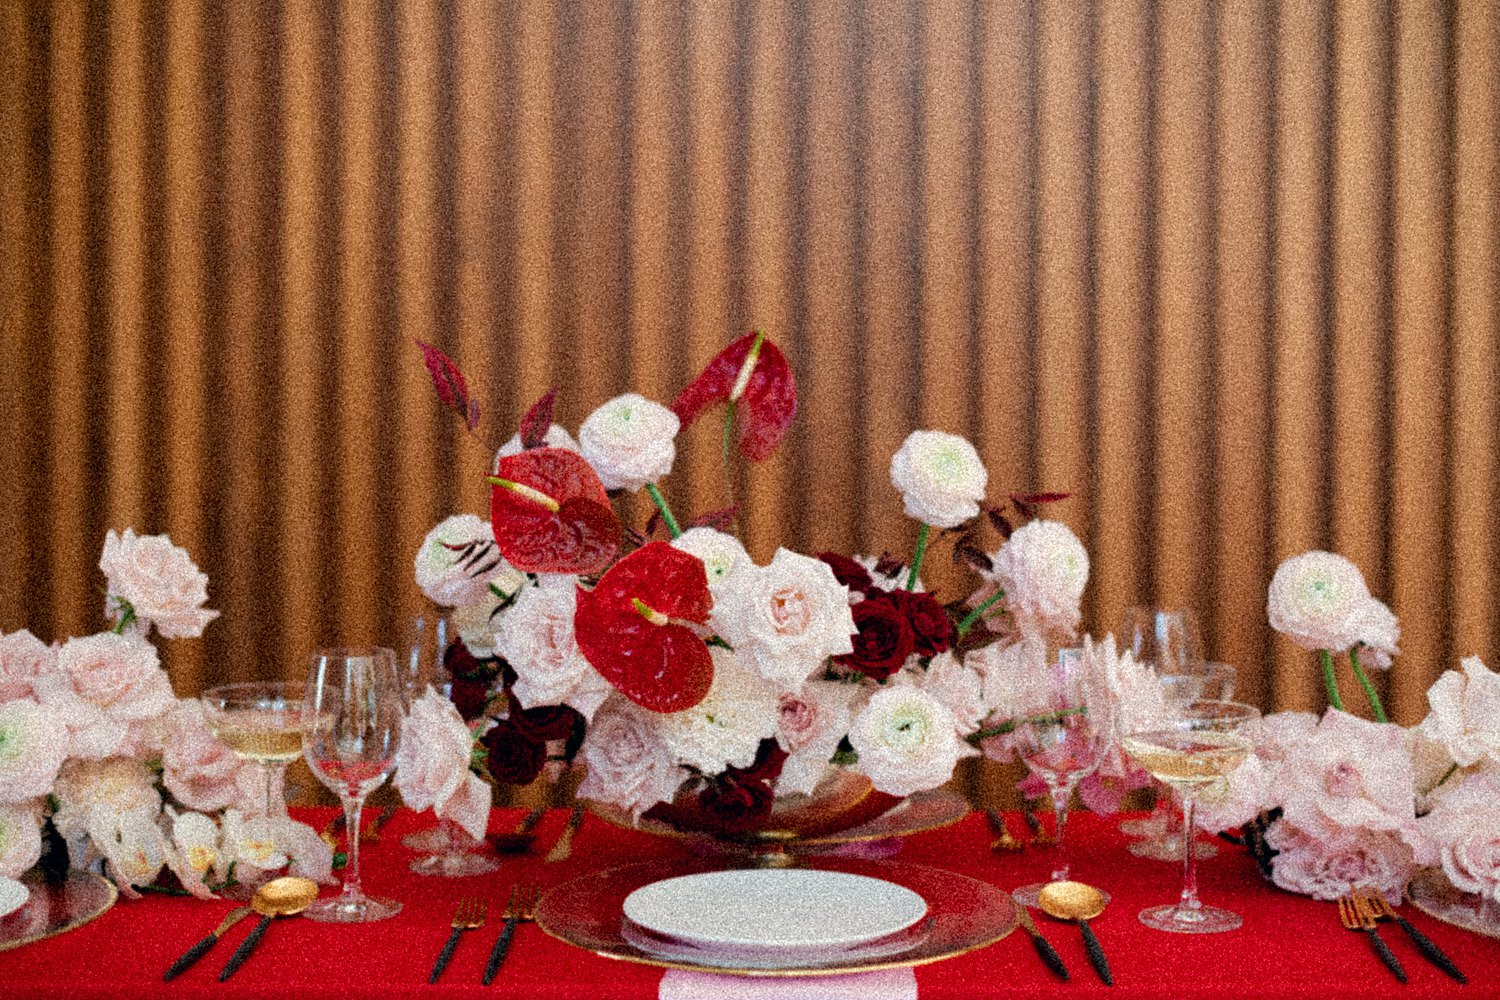 pink and red table florals with white plate and gold silverware Virgin Hotel Dallas